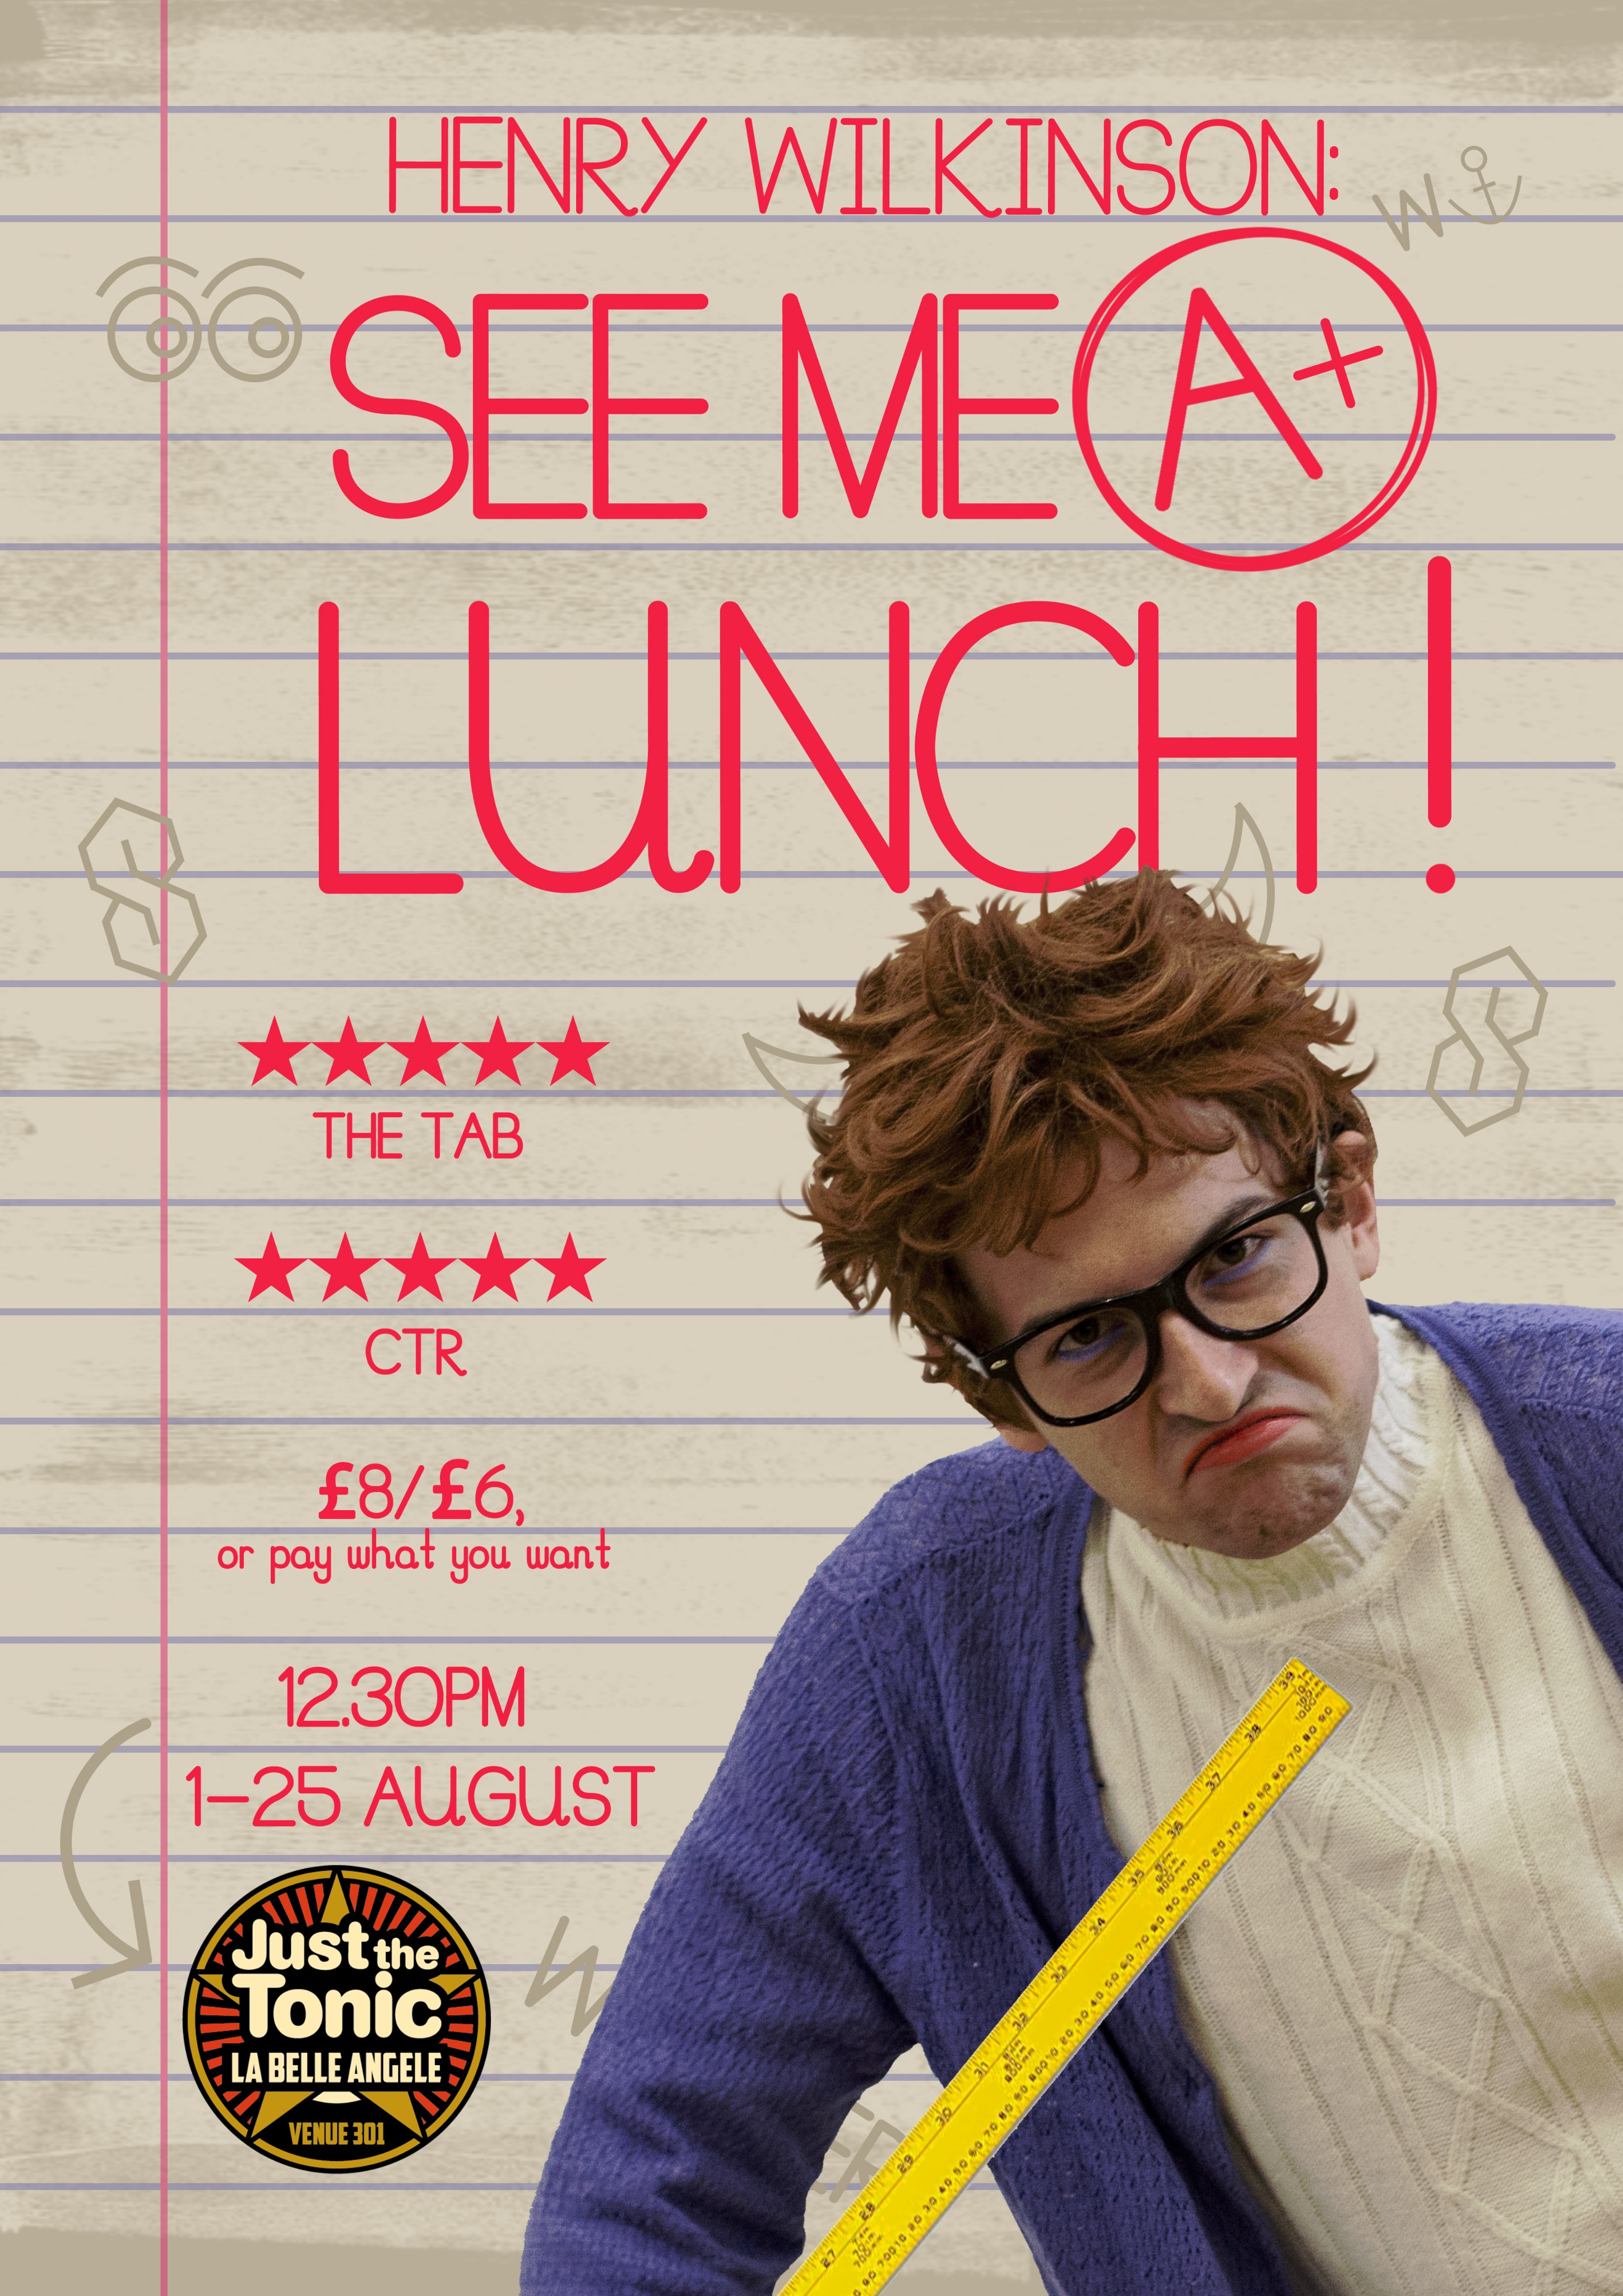 The poster for Henry Wilkinson: See Me at Lunch!